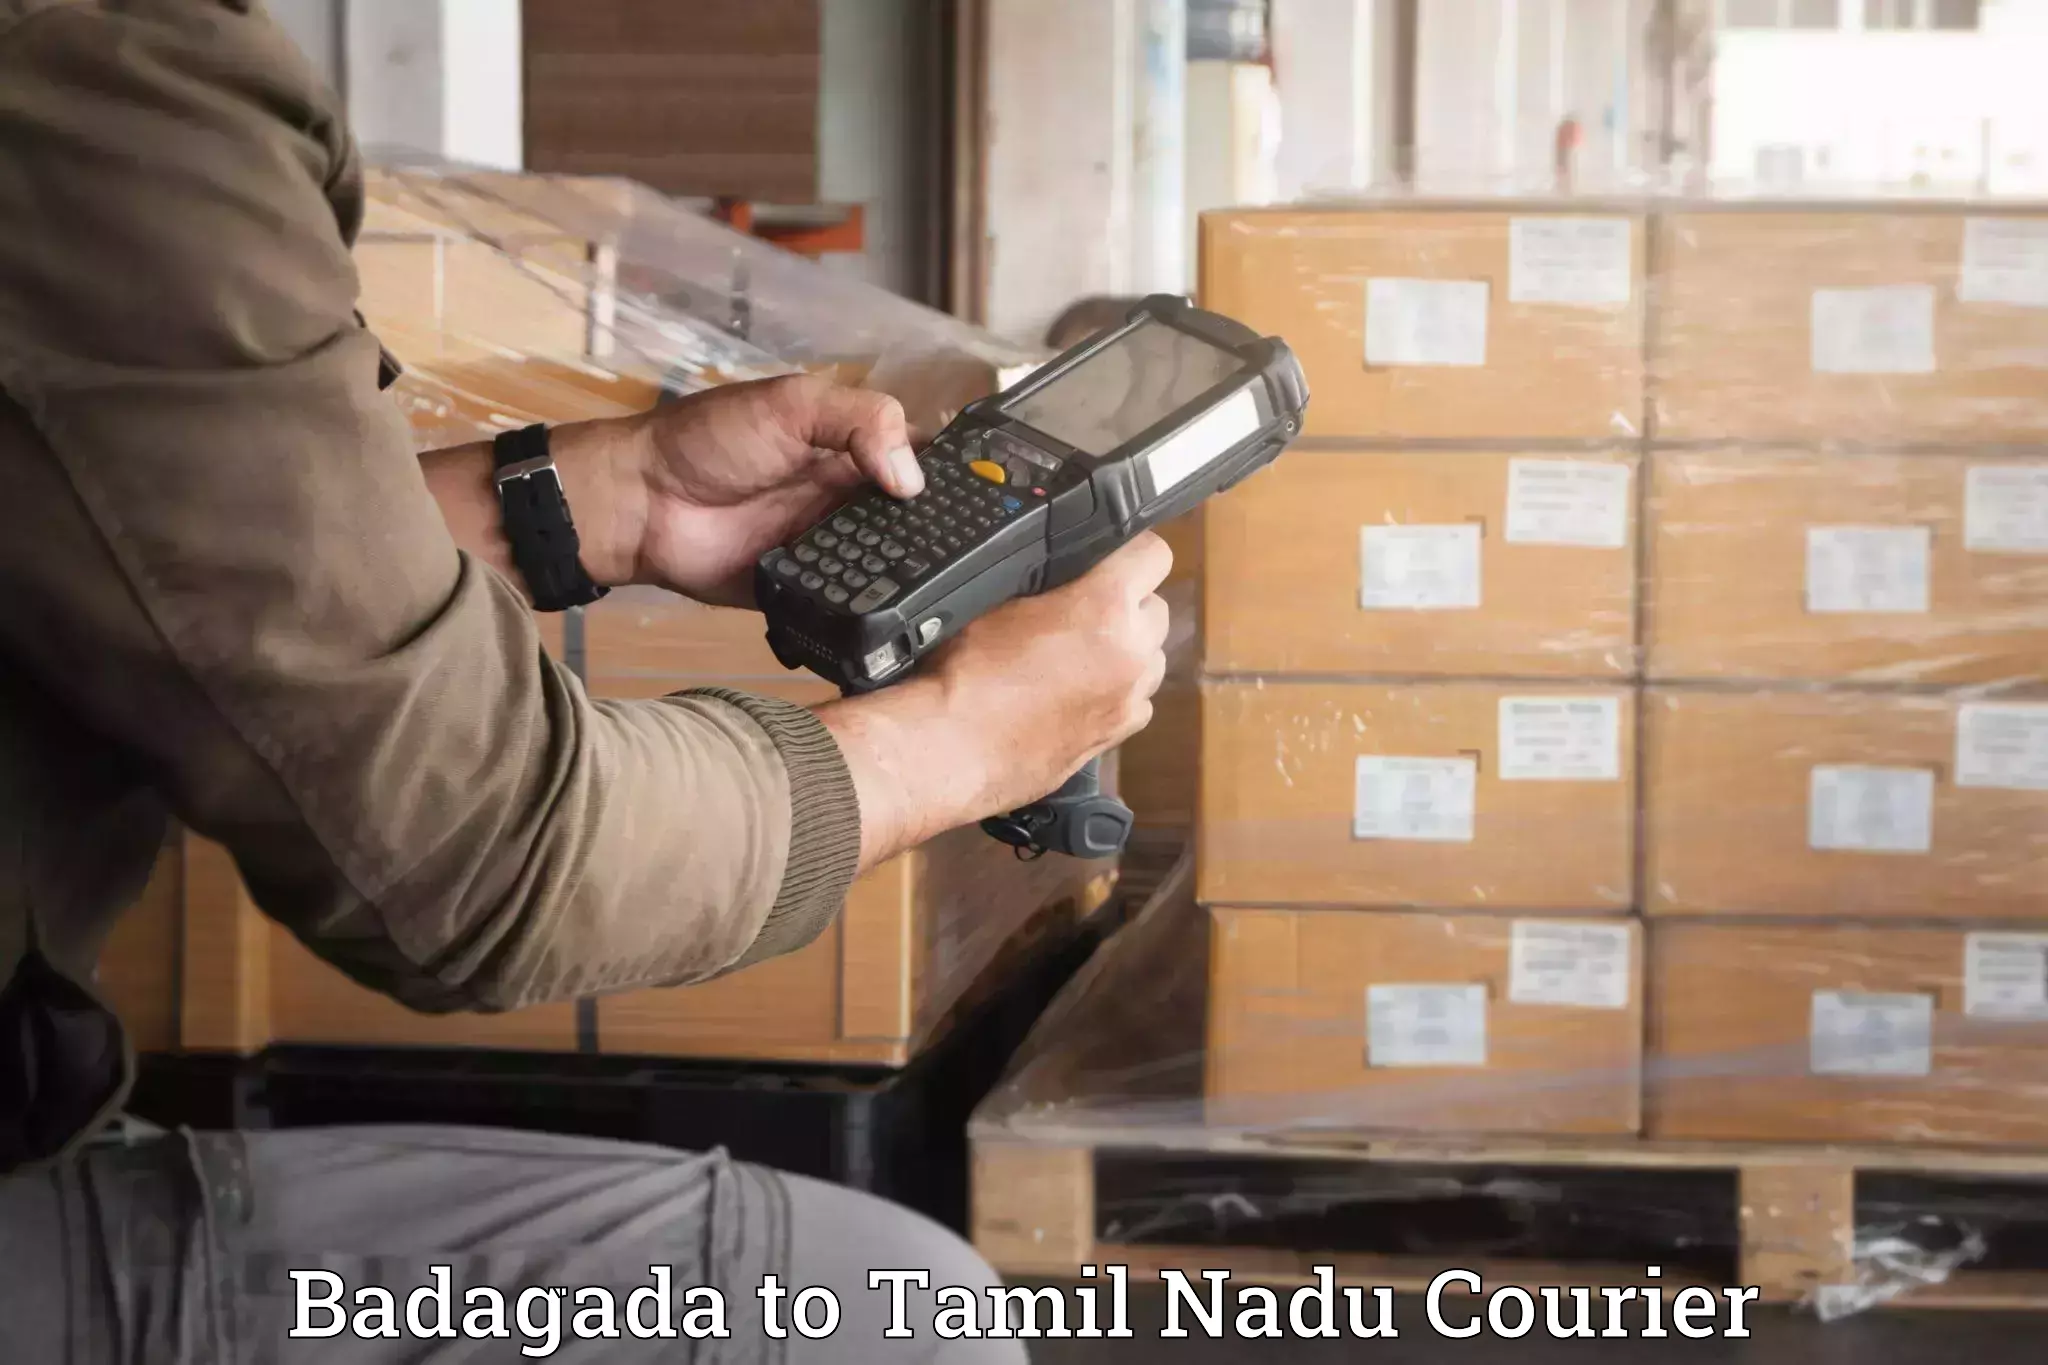 Full-service movers Badagada to Saveetha Institute of Medical and Technical Sciences Chennai